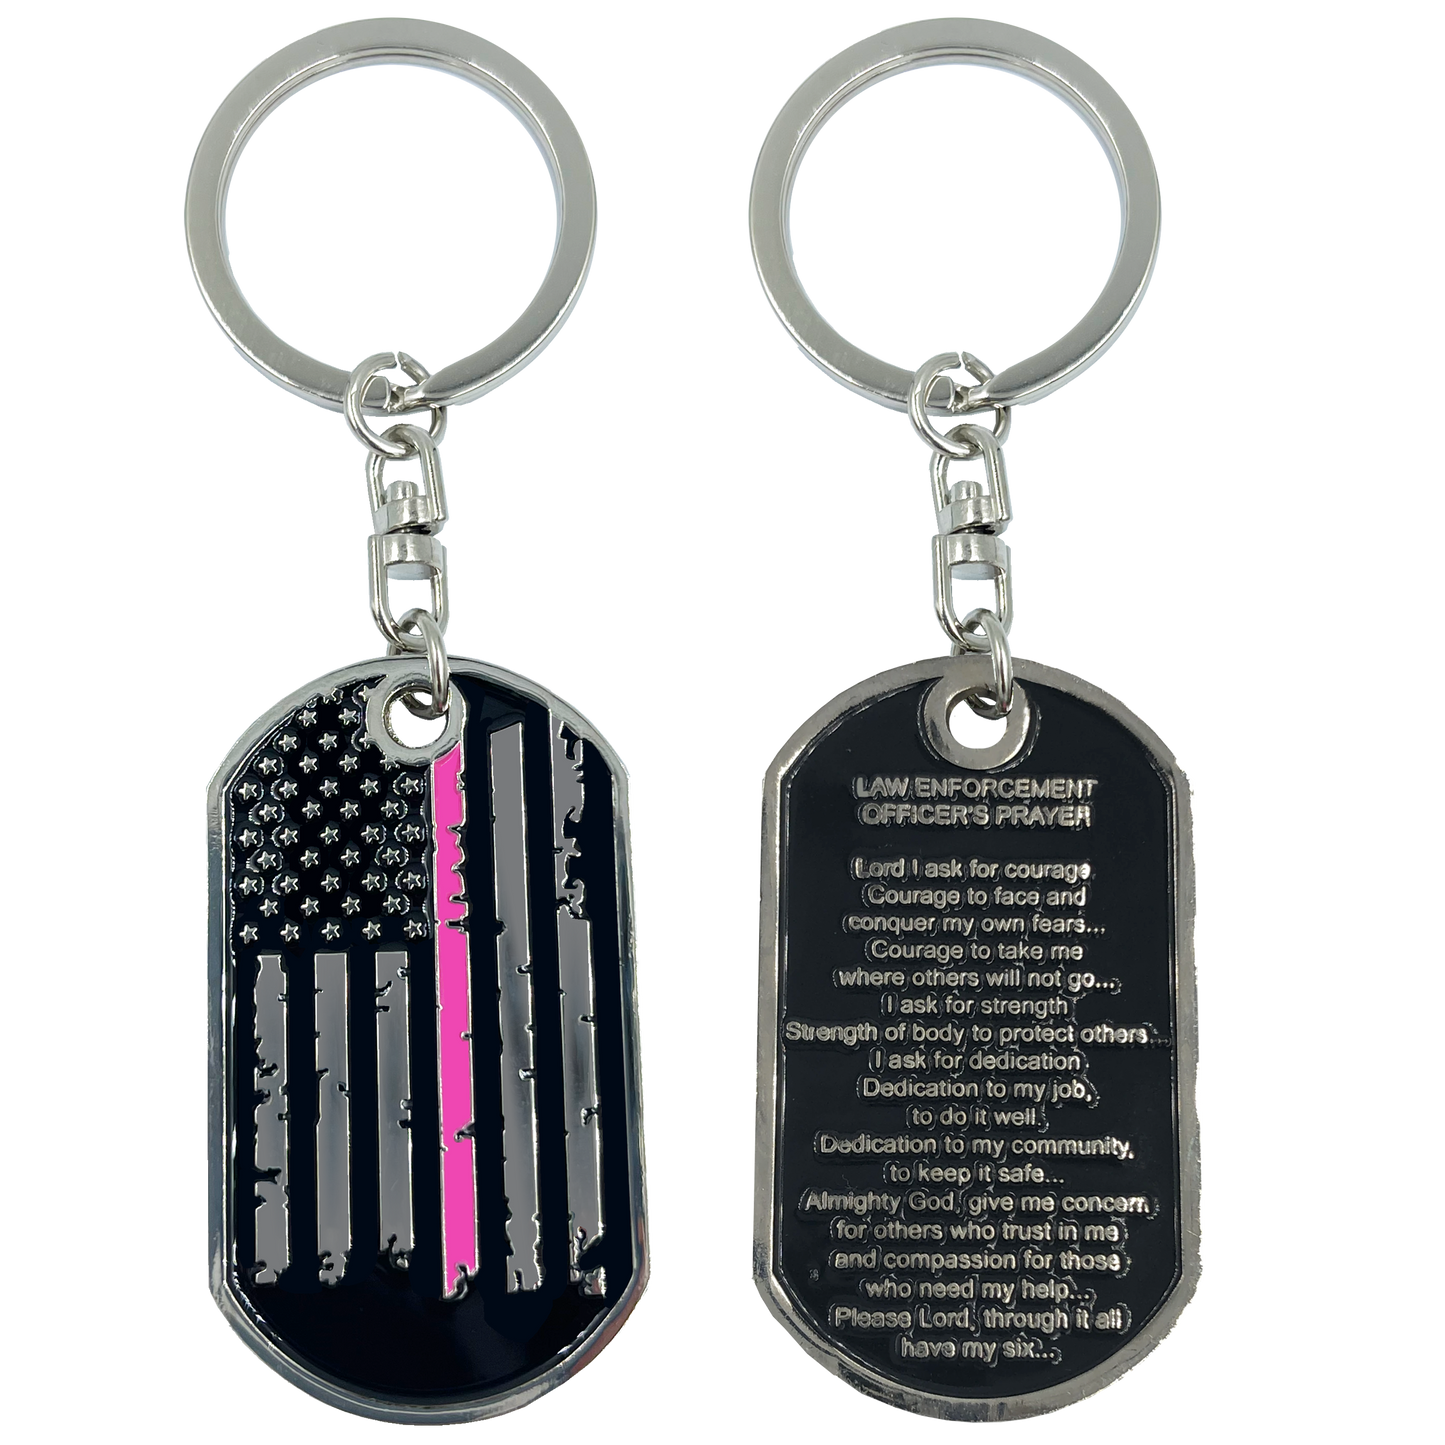 FF-009 Police Officer's Prayer Breast Cancer Awareness Thin Pink Line Challenge Coin Dog Tag Keychain Police Law Enforcement